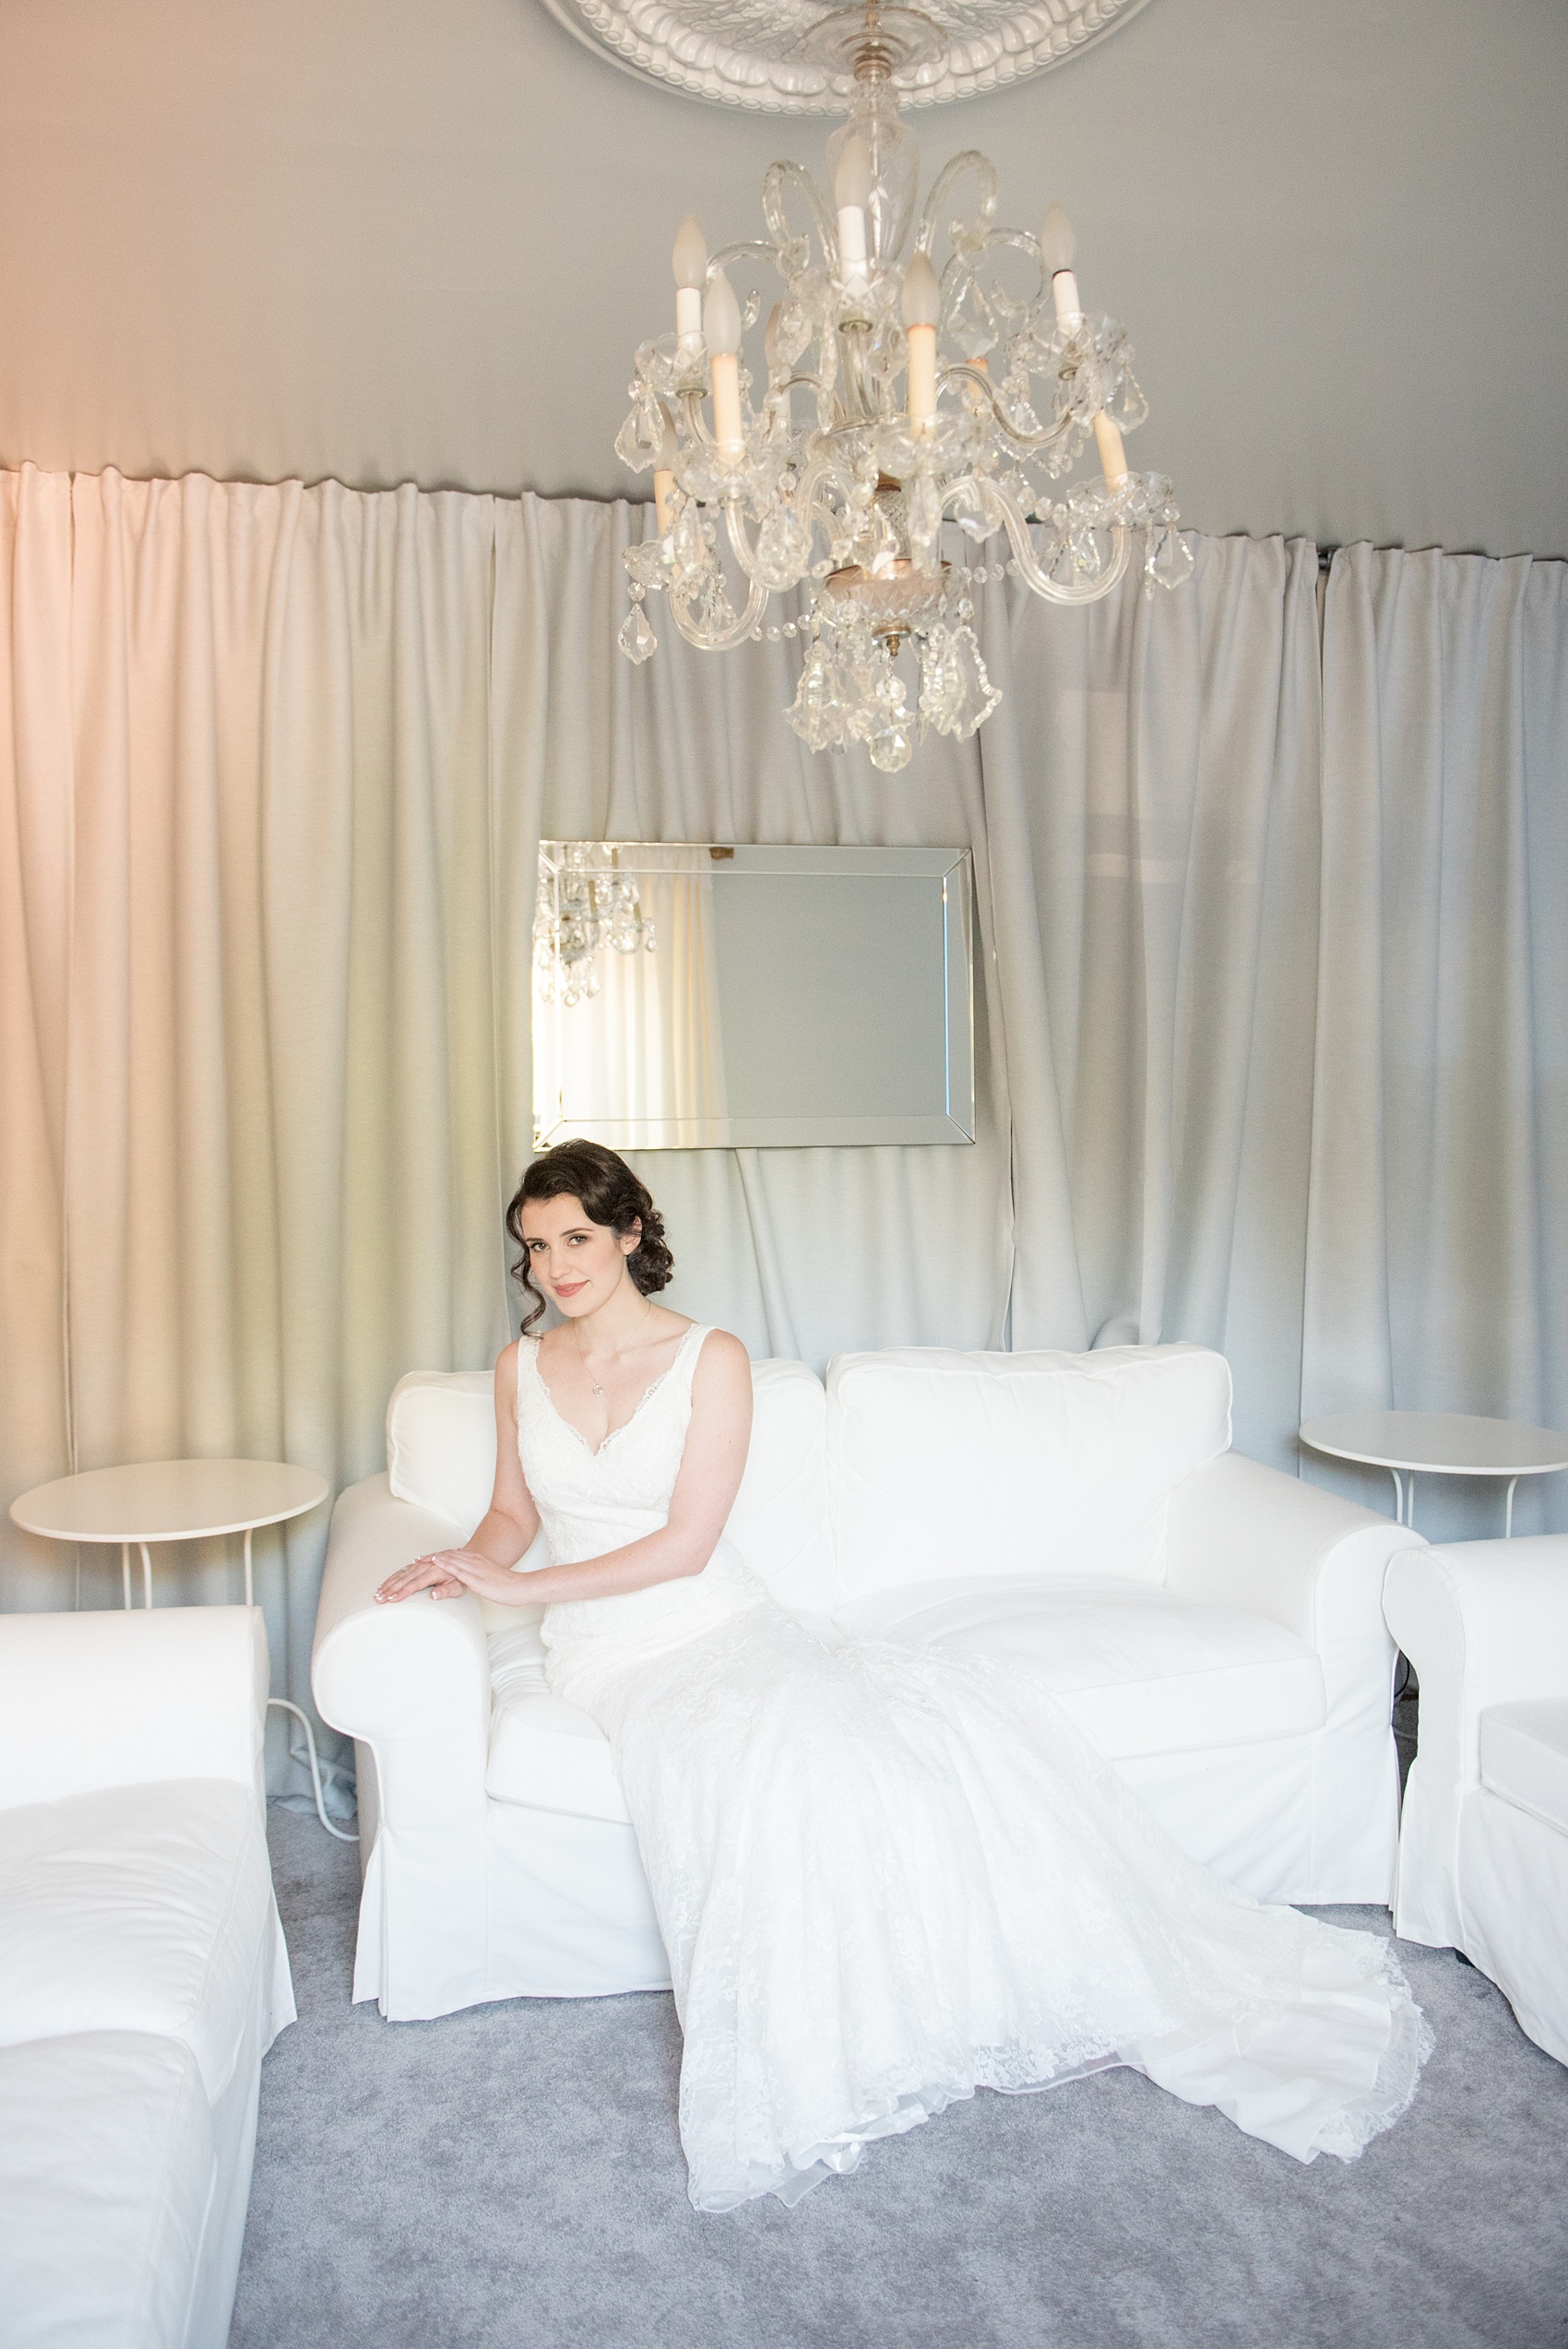 Mikkel Paige Photography photos of a wedding in downtown Raleigh. The bride got ready at The White Room.